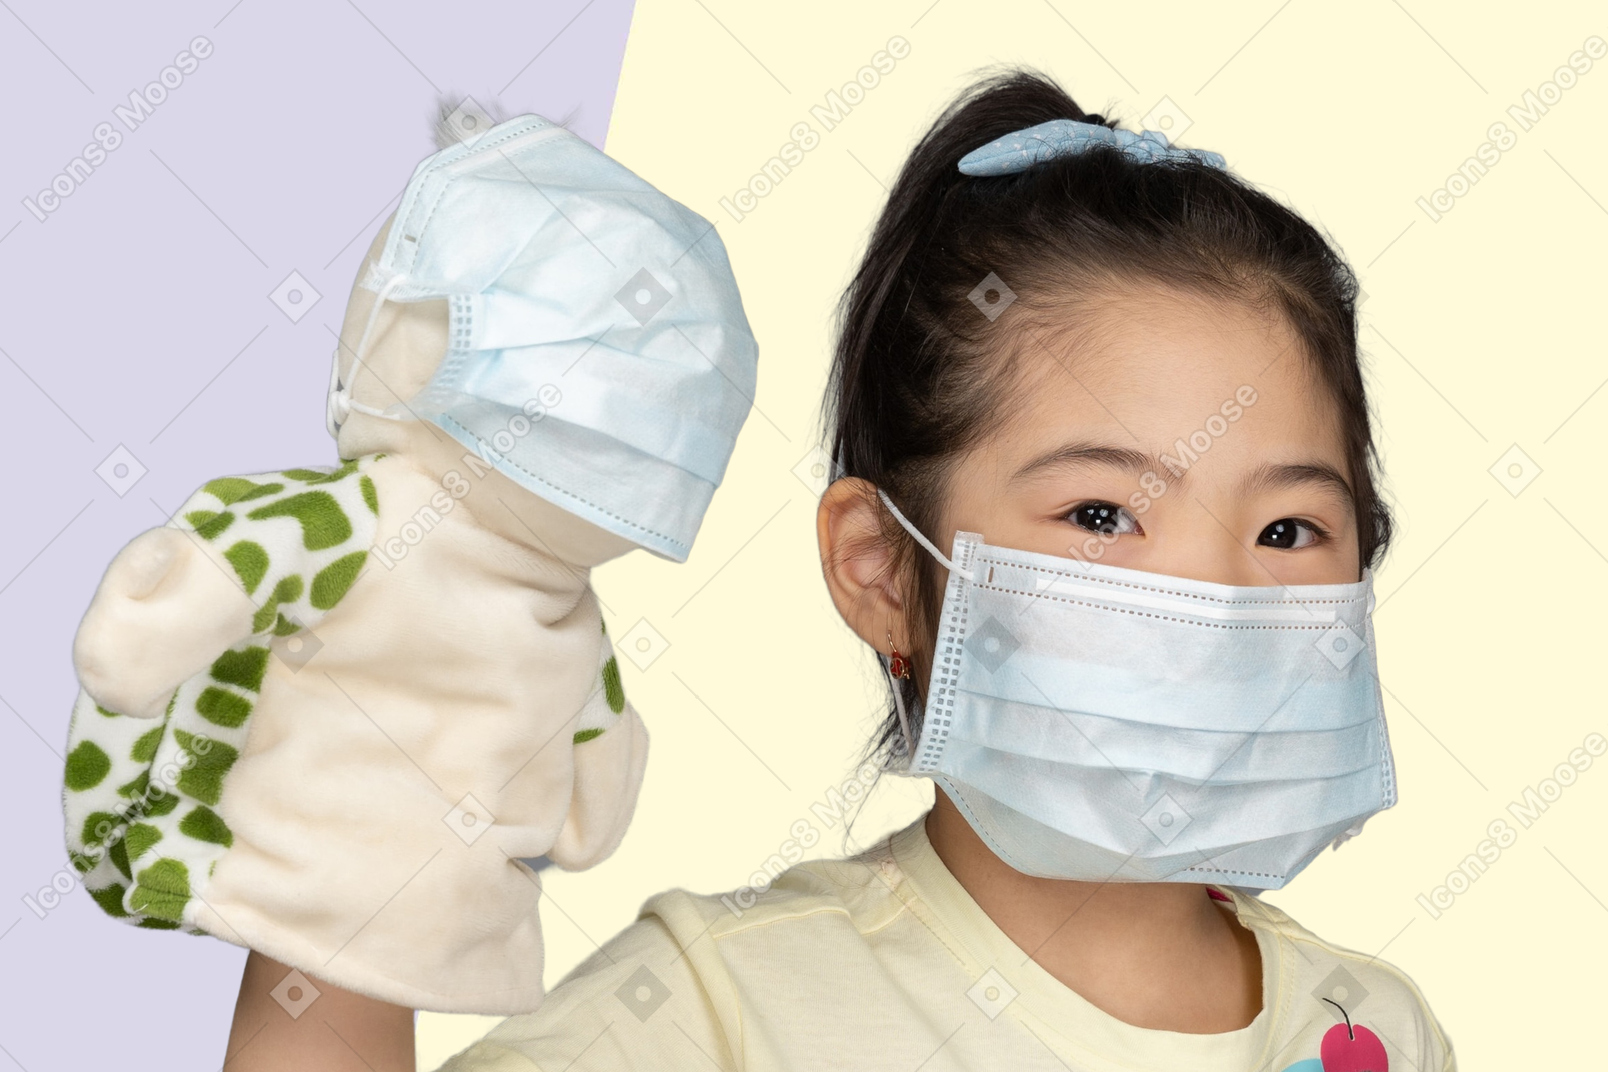 Girl and her toy wearing face masks